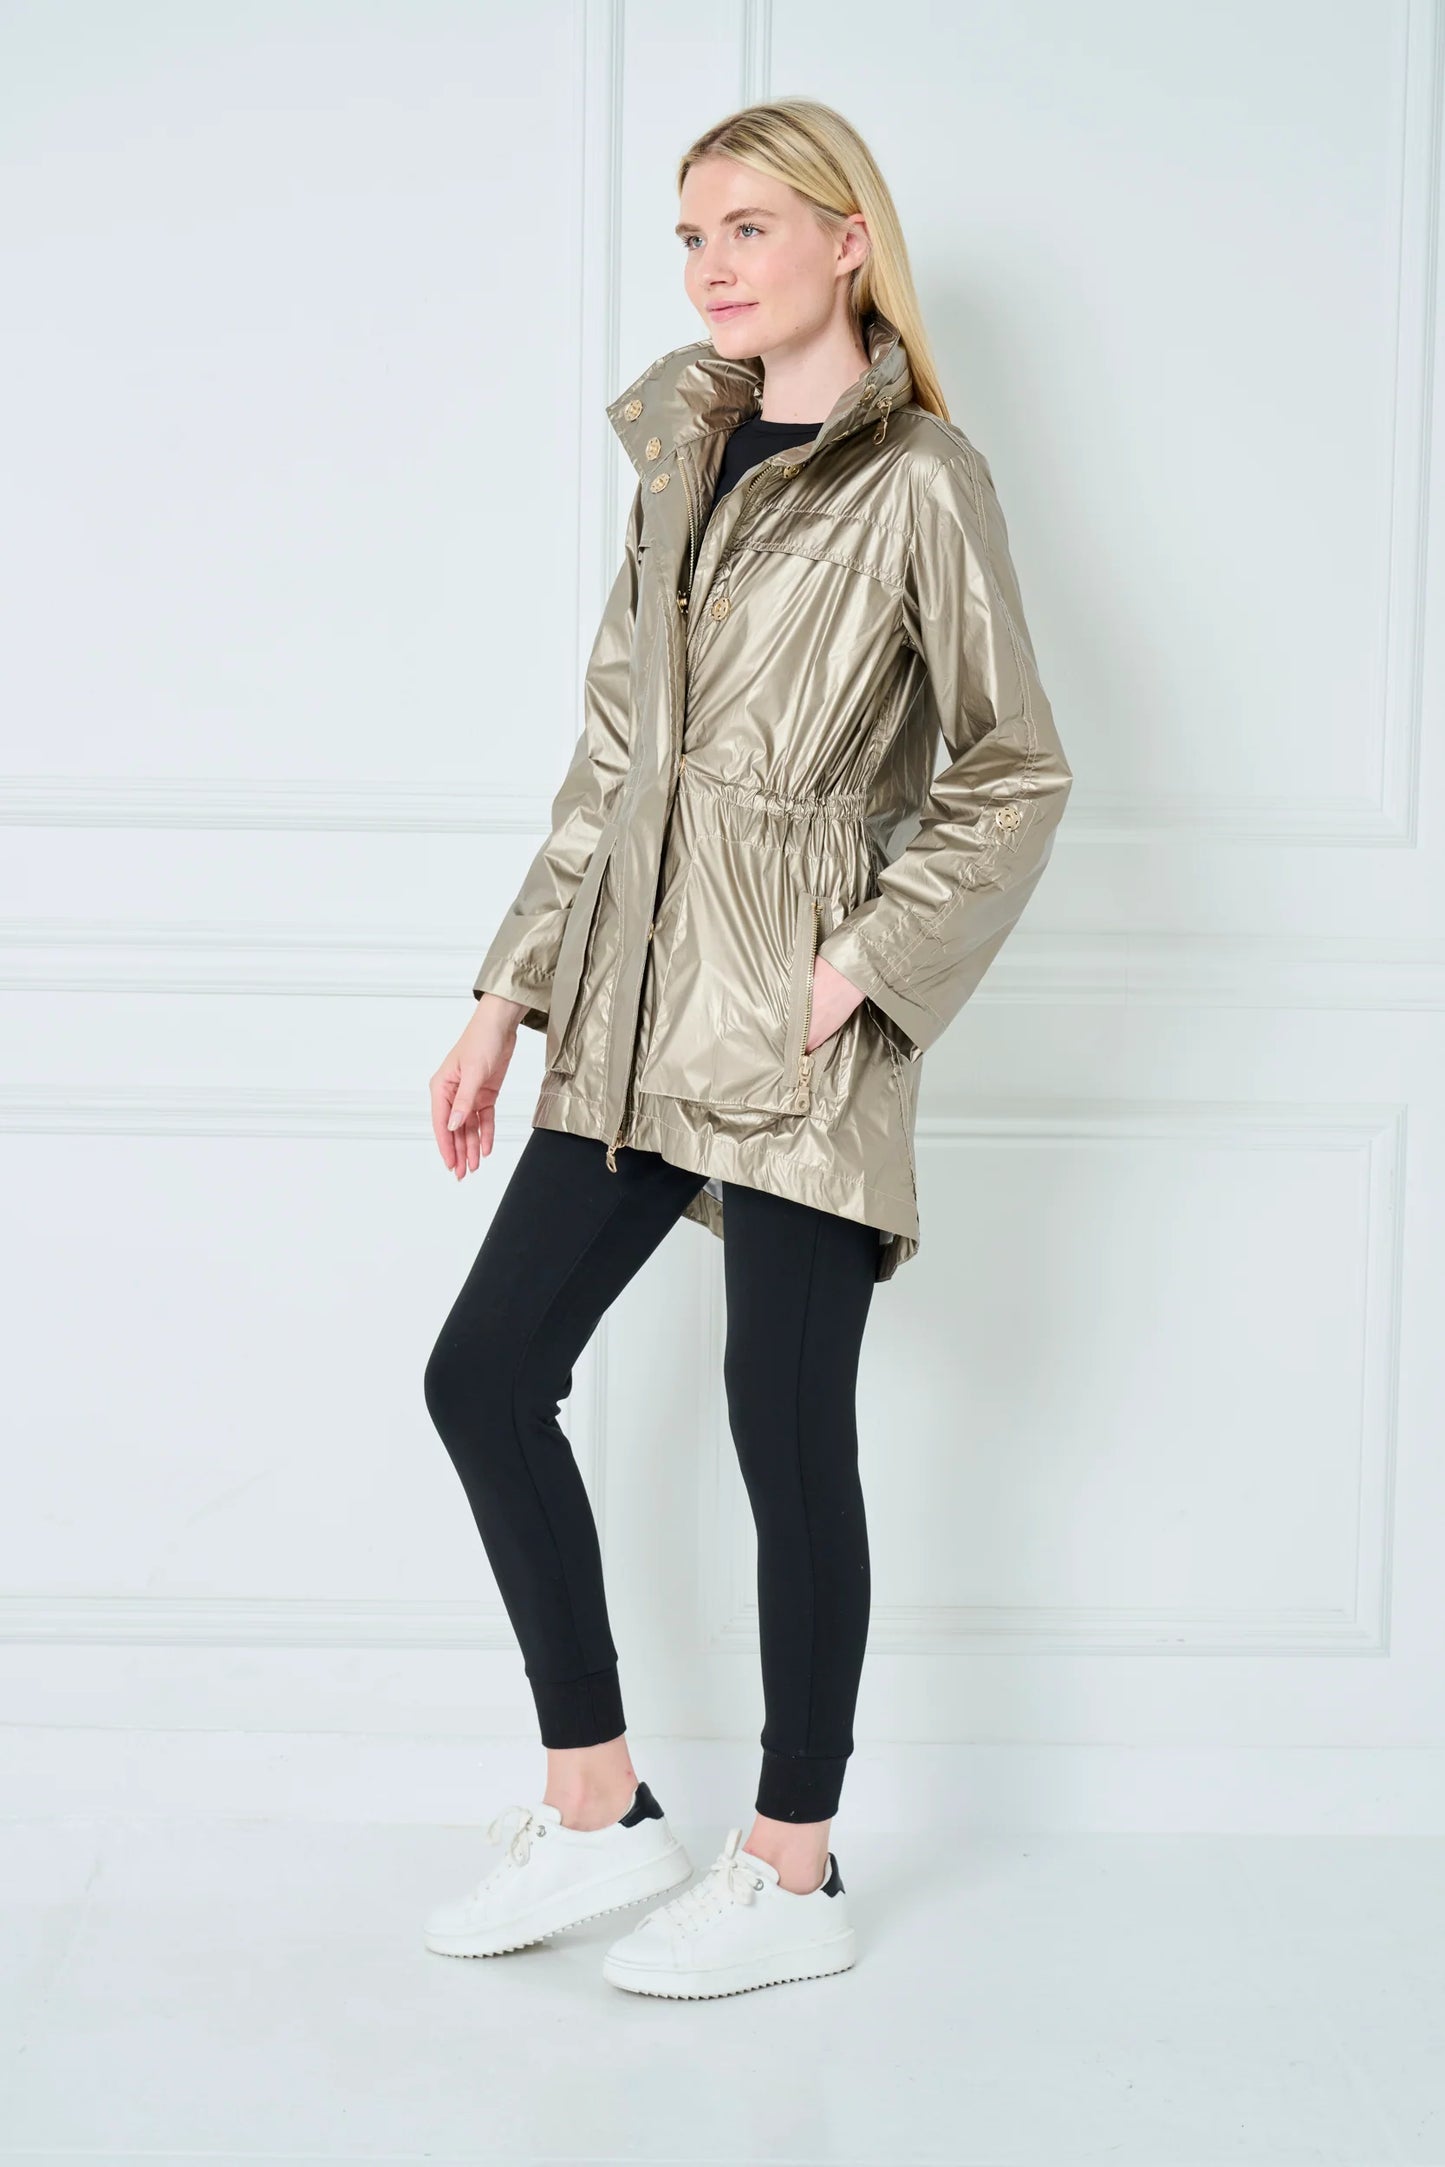 The Anorak Crinkle Jacket in Gold